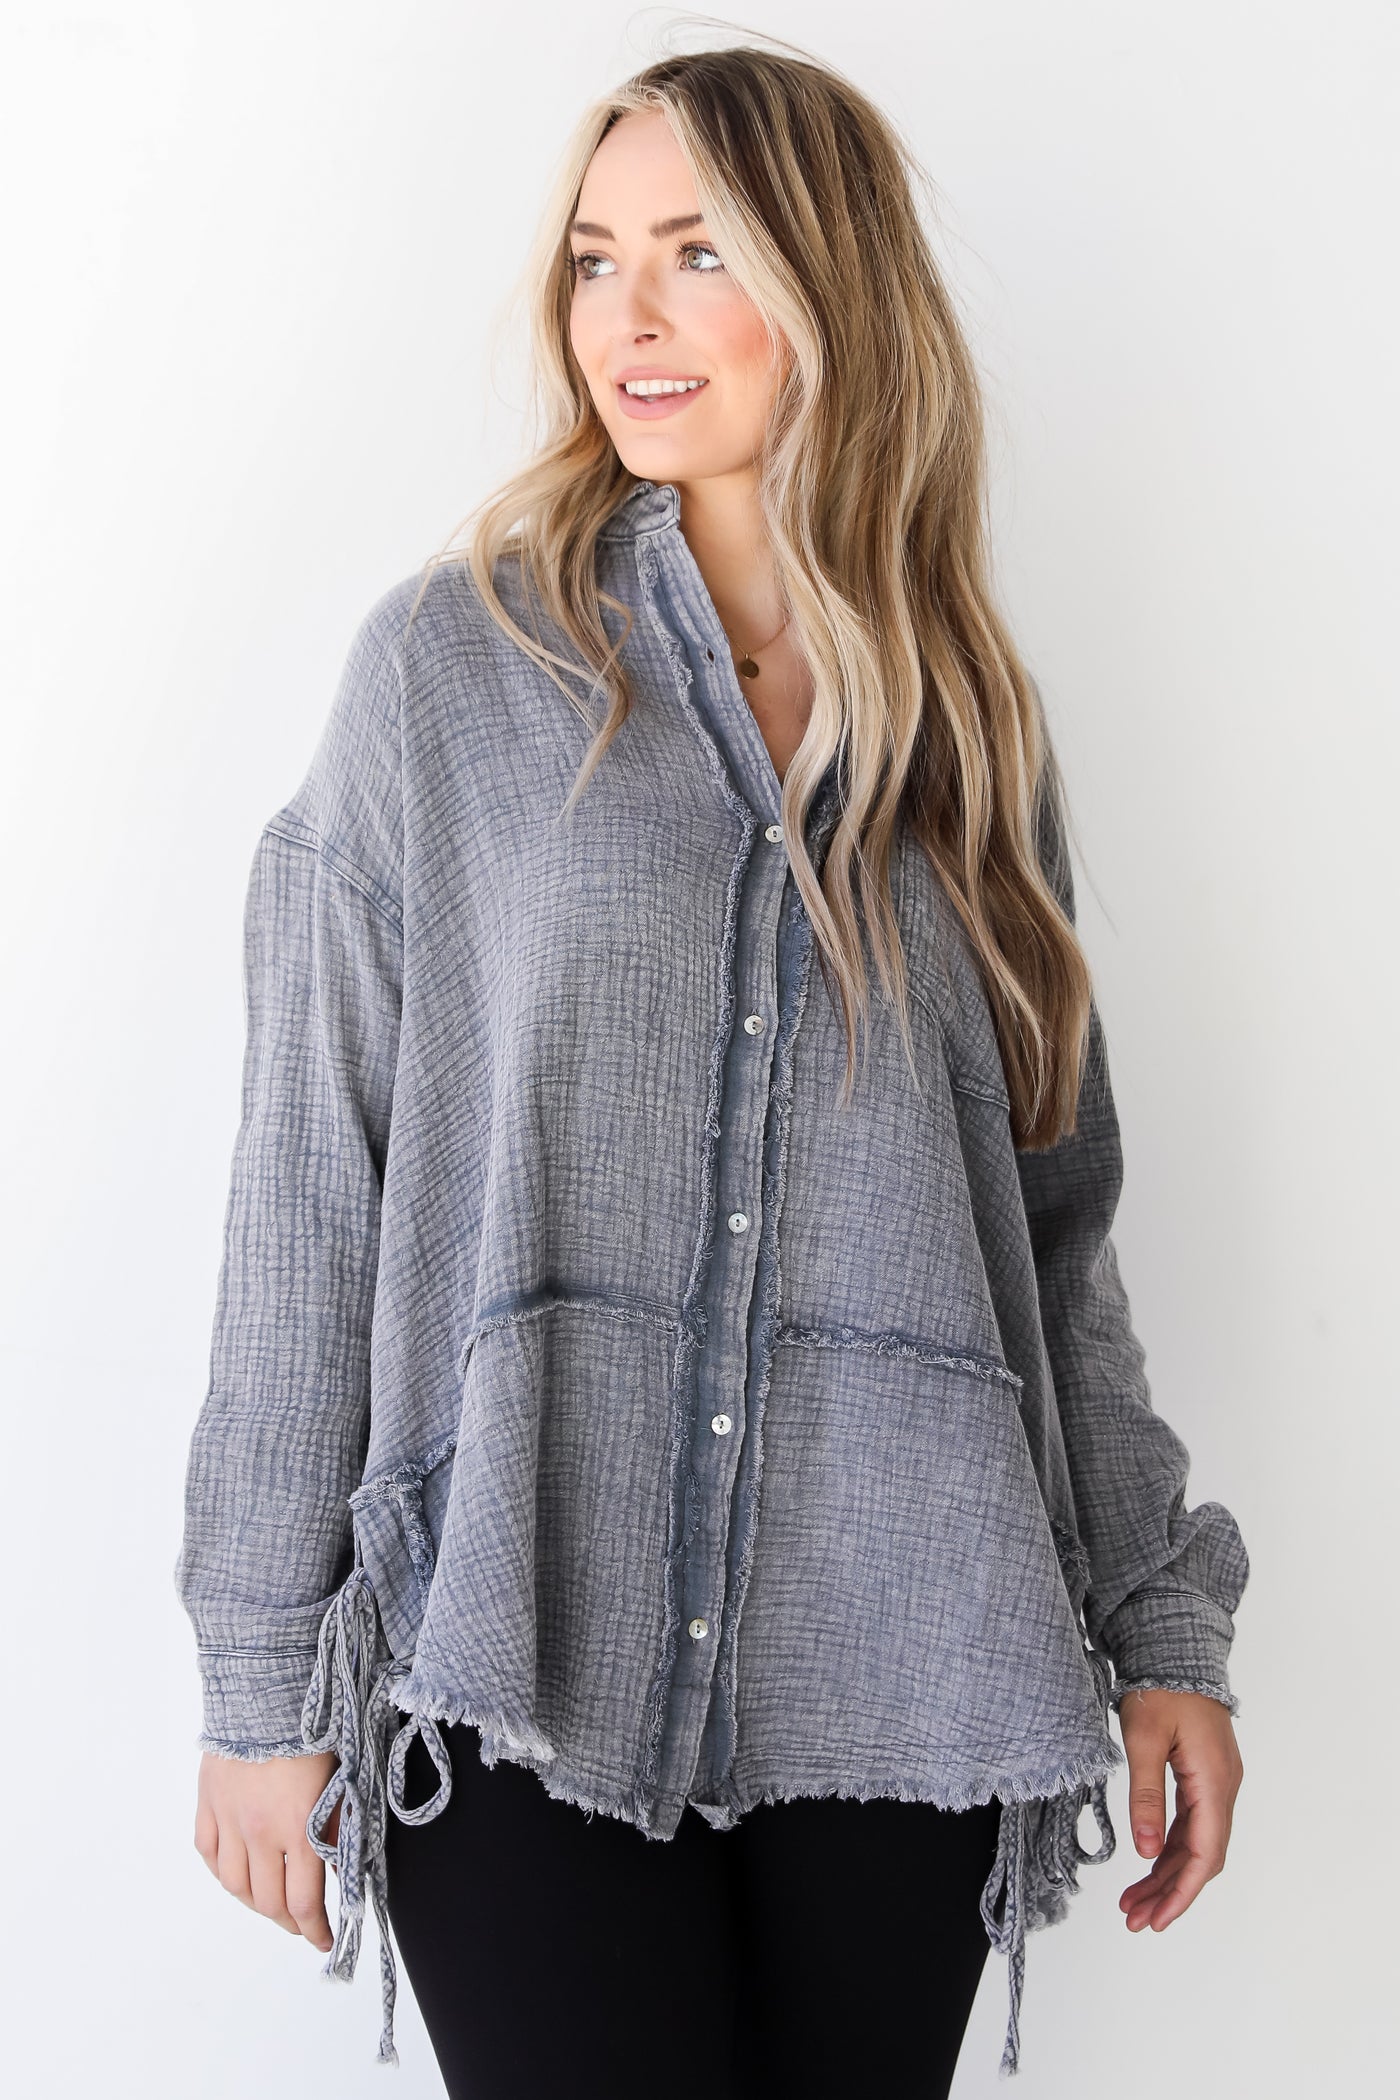 Linen Button-Up Blouse on model